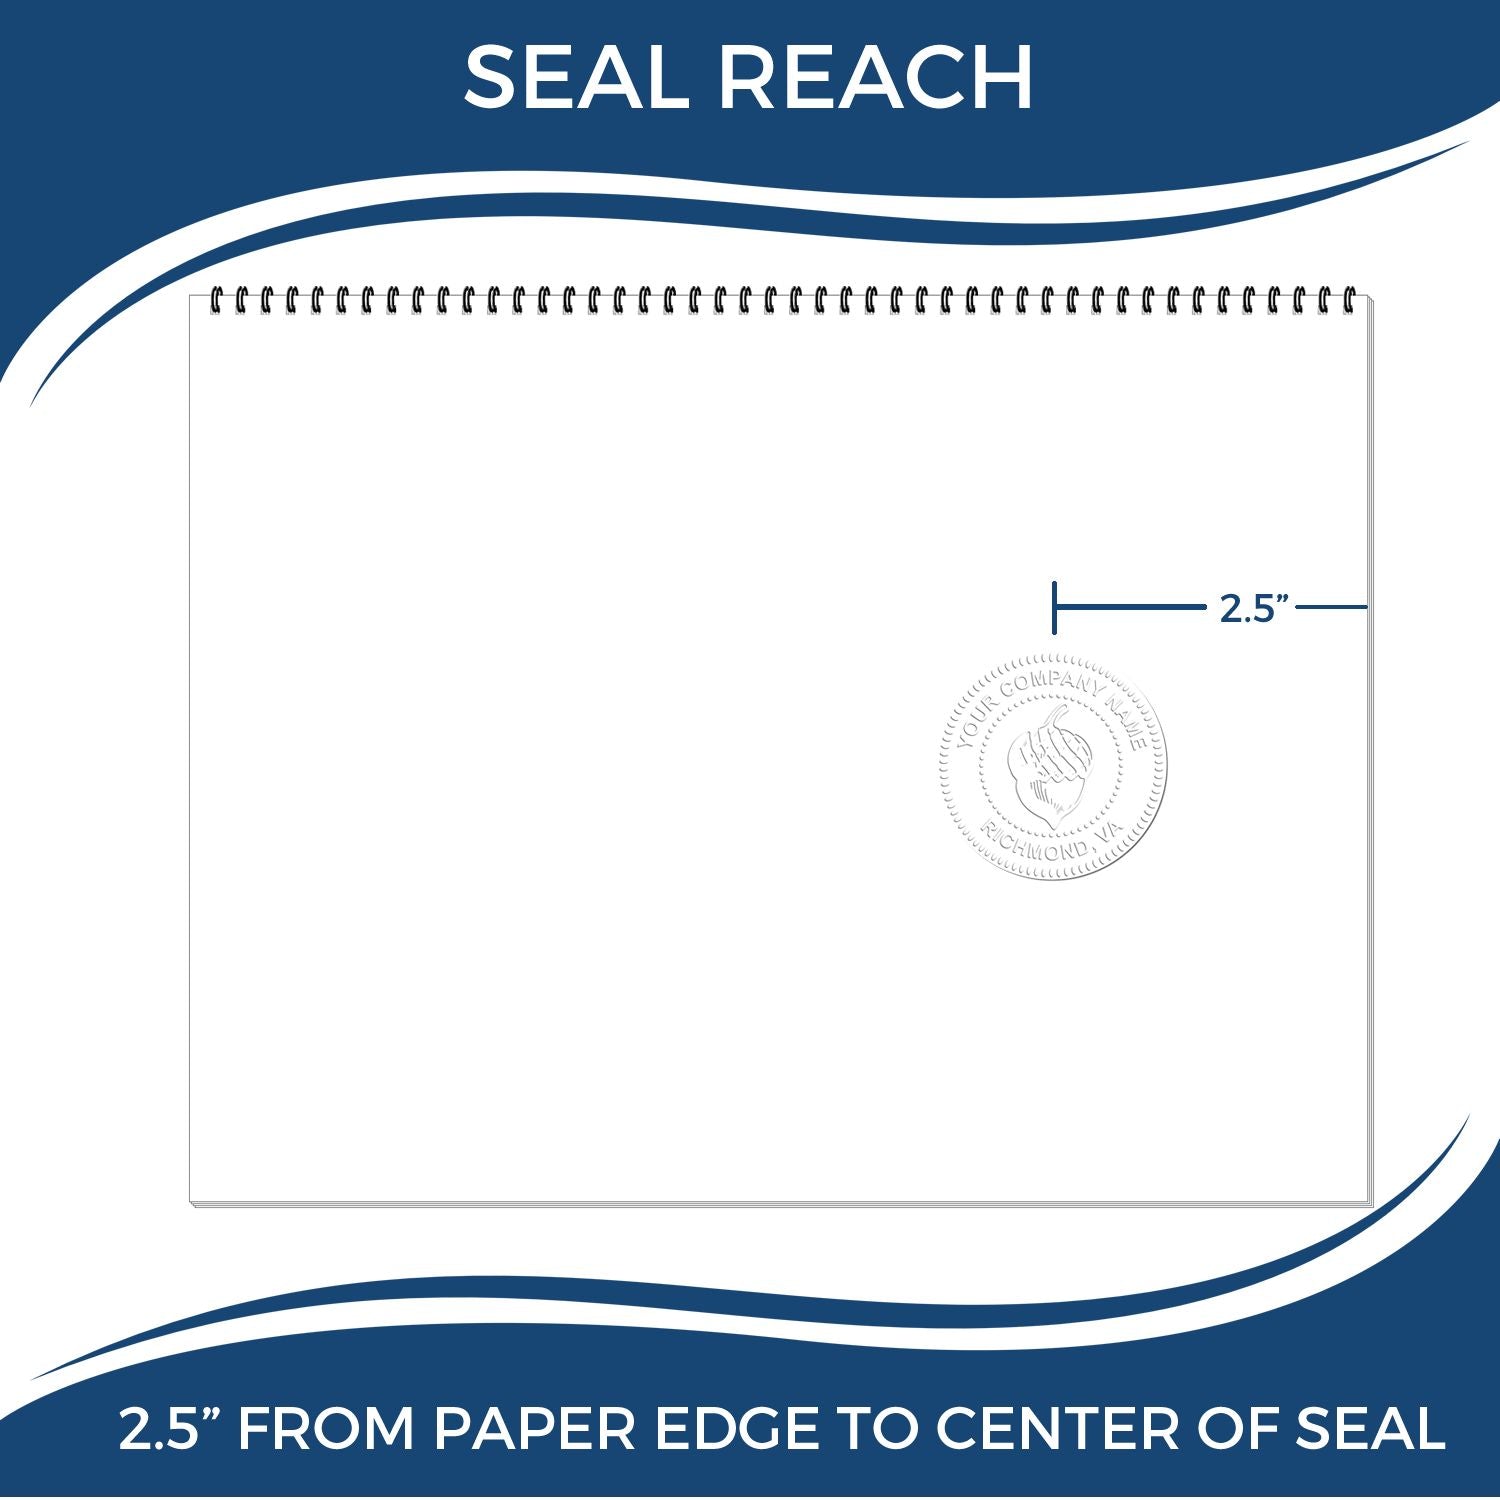 An infographic showing the seal reach which is represented by a ruler and a miniature seal image of the Heavy Duty Cast Iron Nebraska Geologist Seal Embosser